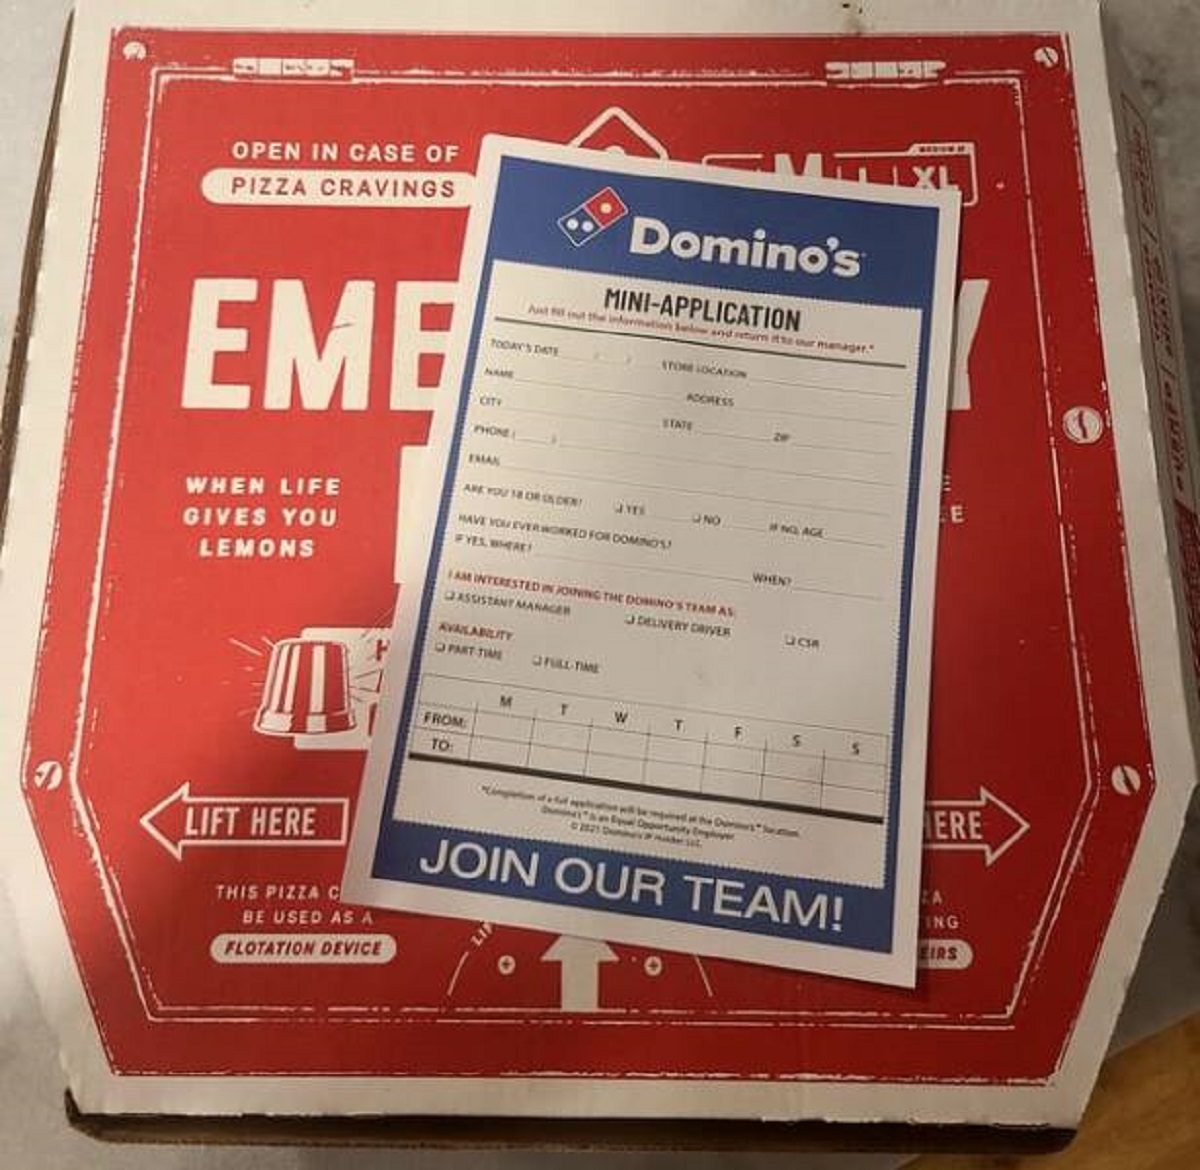 "My pizza came with a job application"